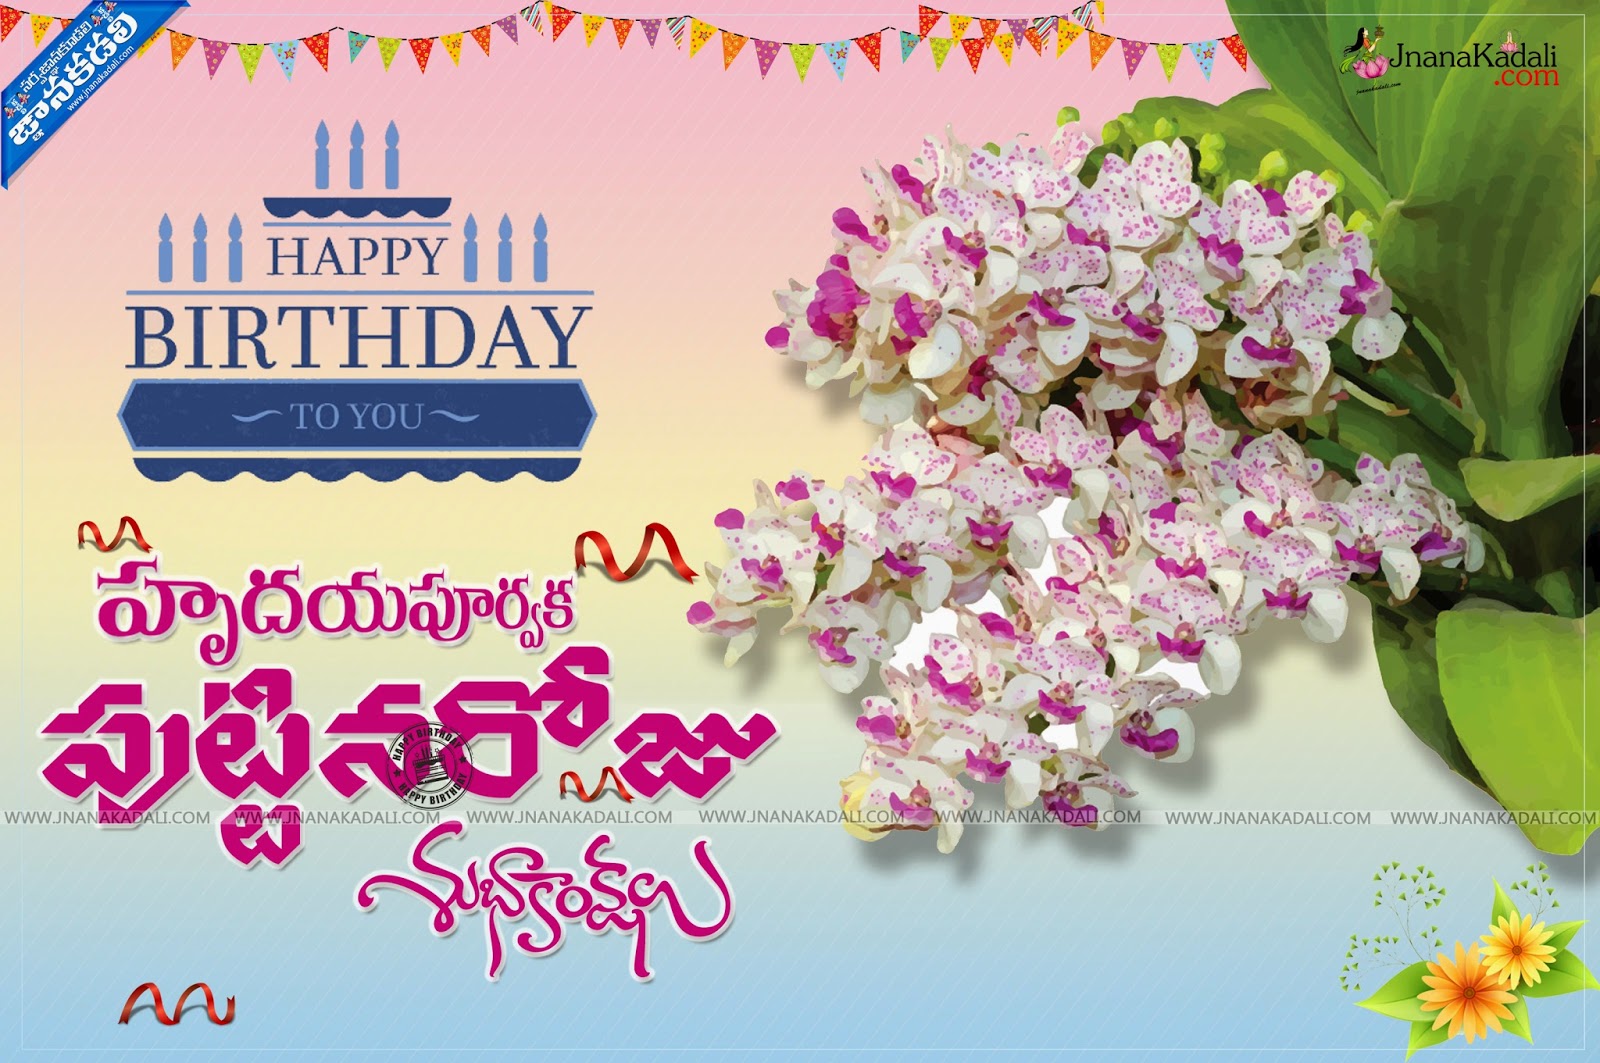 Birth Day Greetings with Images Birth Day Greetings Wallpapers ...